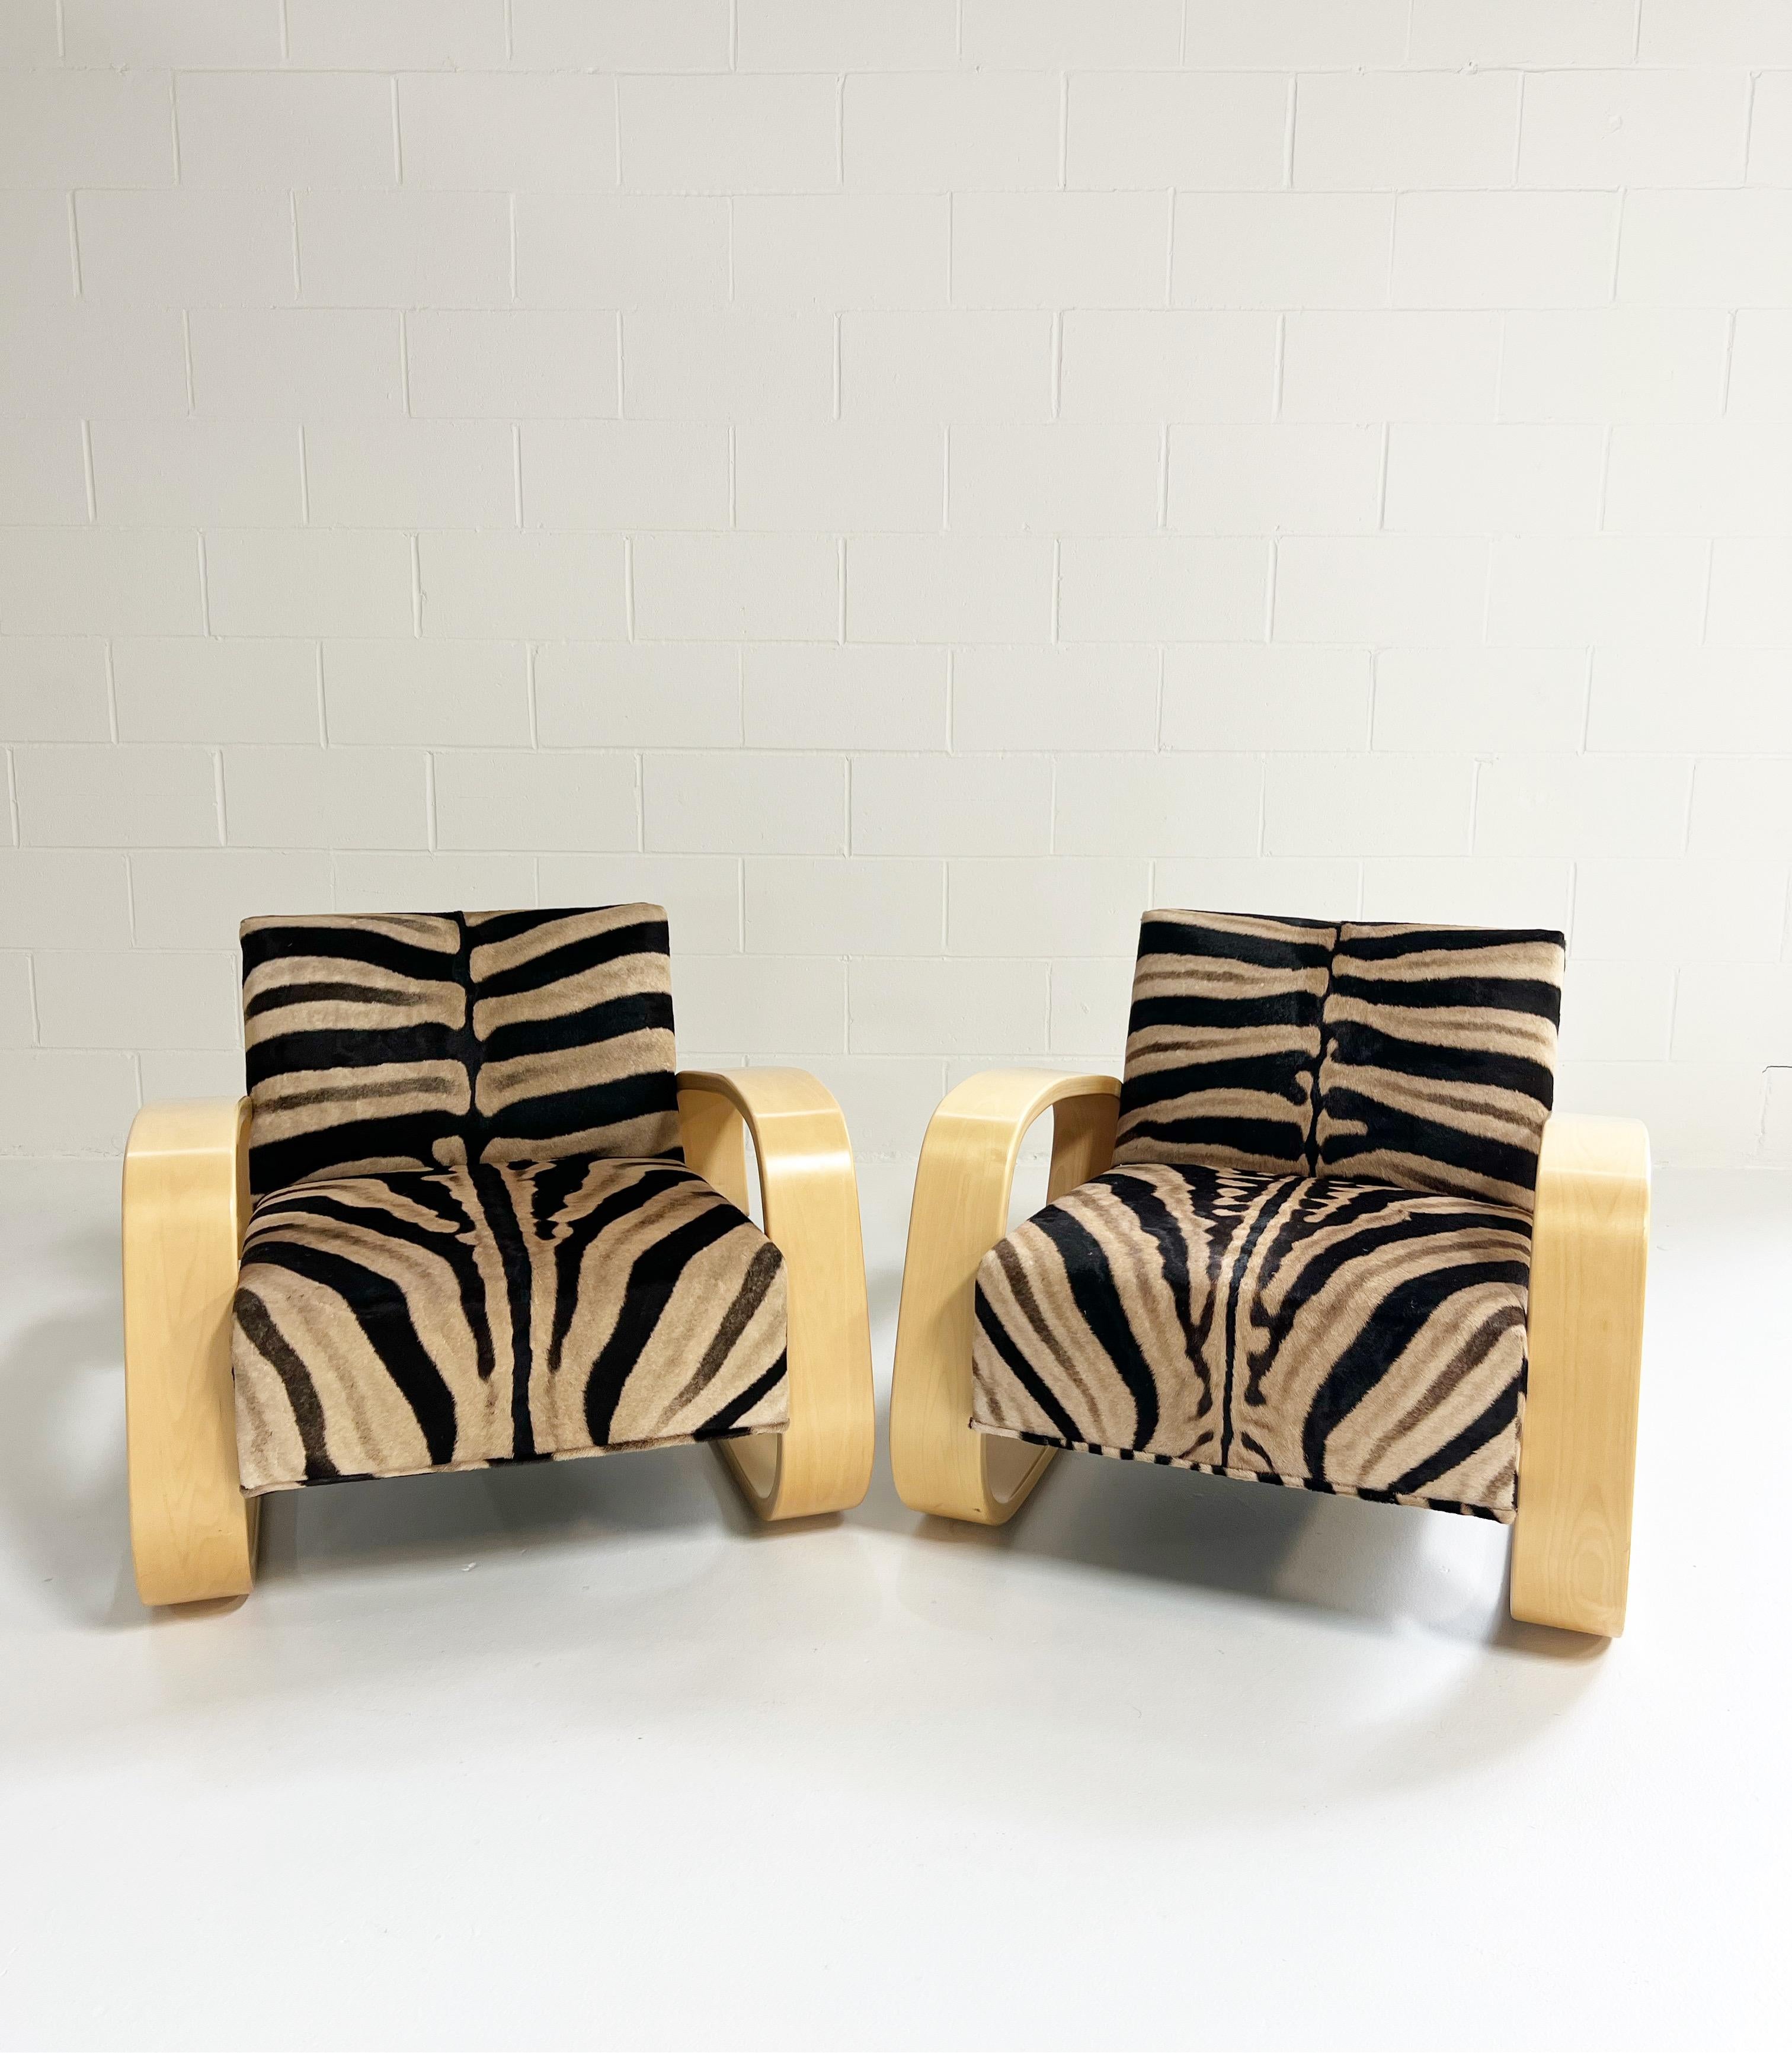 One-of-a-Kind Pair of Alvar Aalto Model 400 